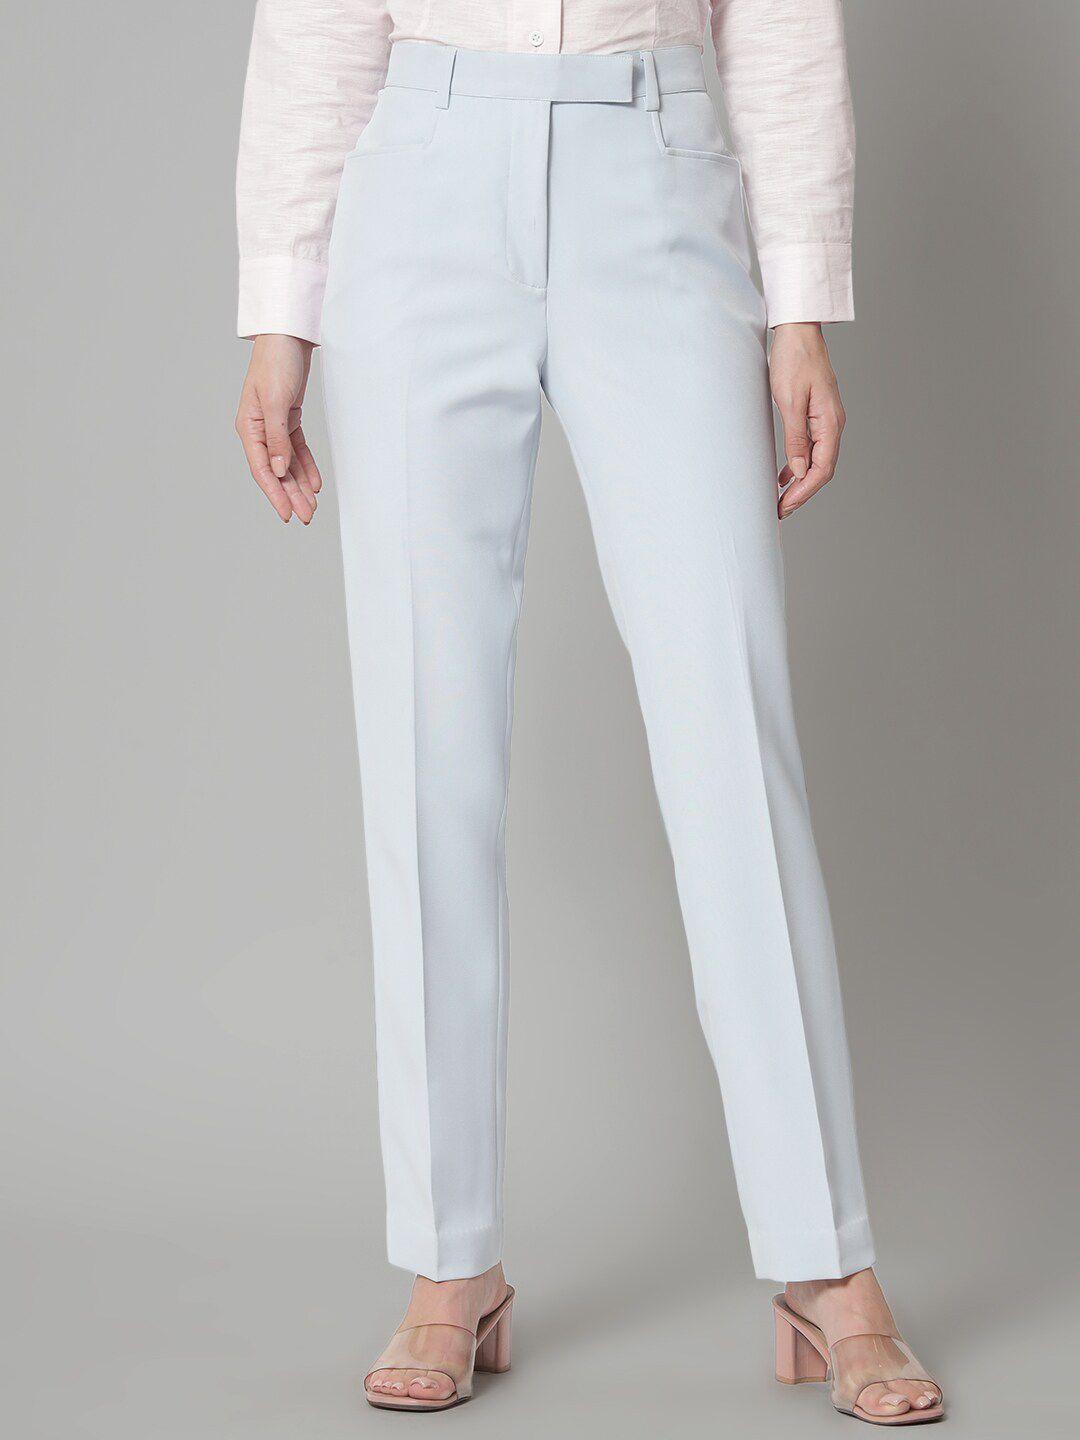 powersutra-women-mid-rise-tailored-fit-easy-wash-formal-trousers